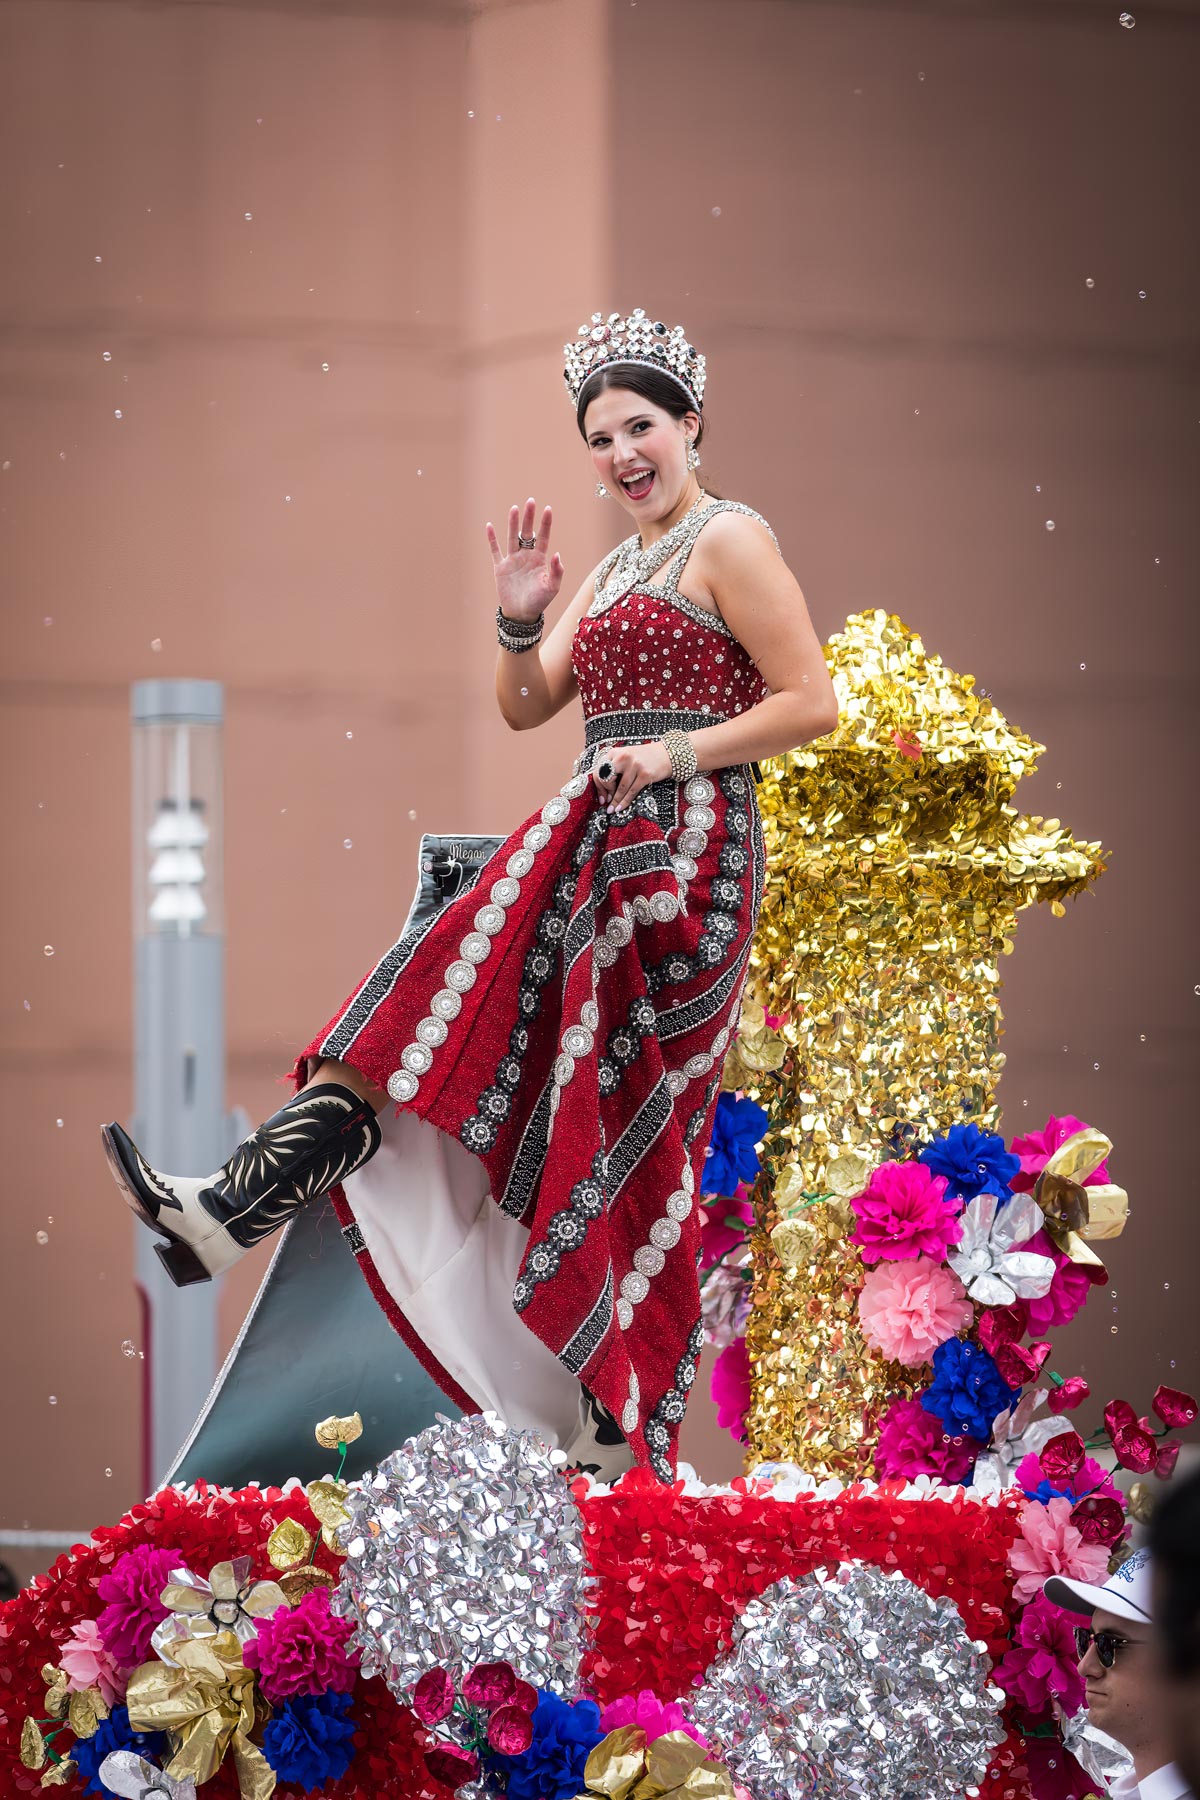 Queen on parade float showing off her boots for an article on the best Fiesta photos